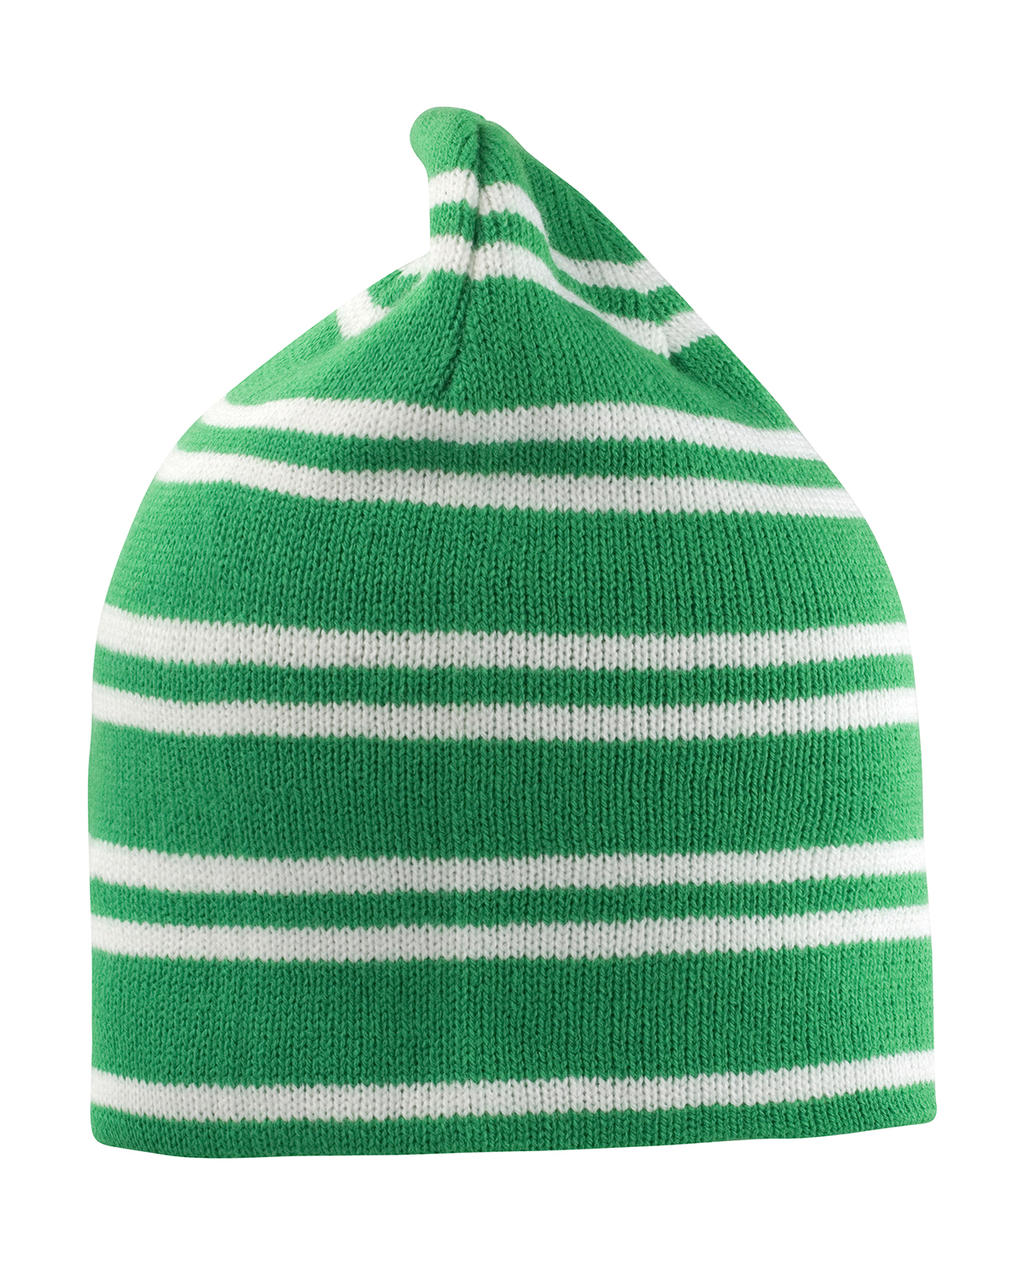  Team Reversible Beanie in Farbe Kelly Green/White/Kelly Green